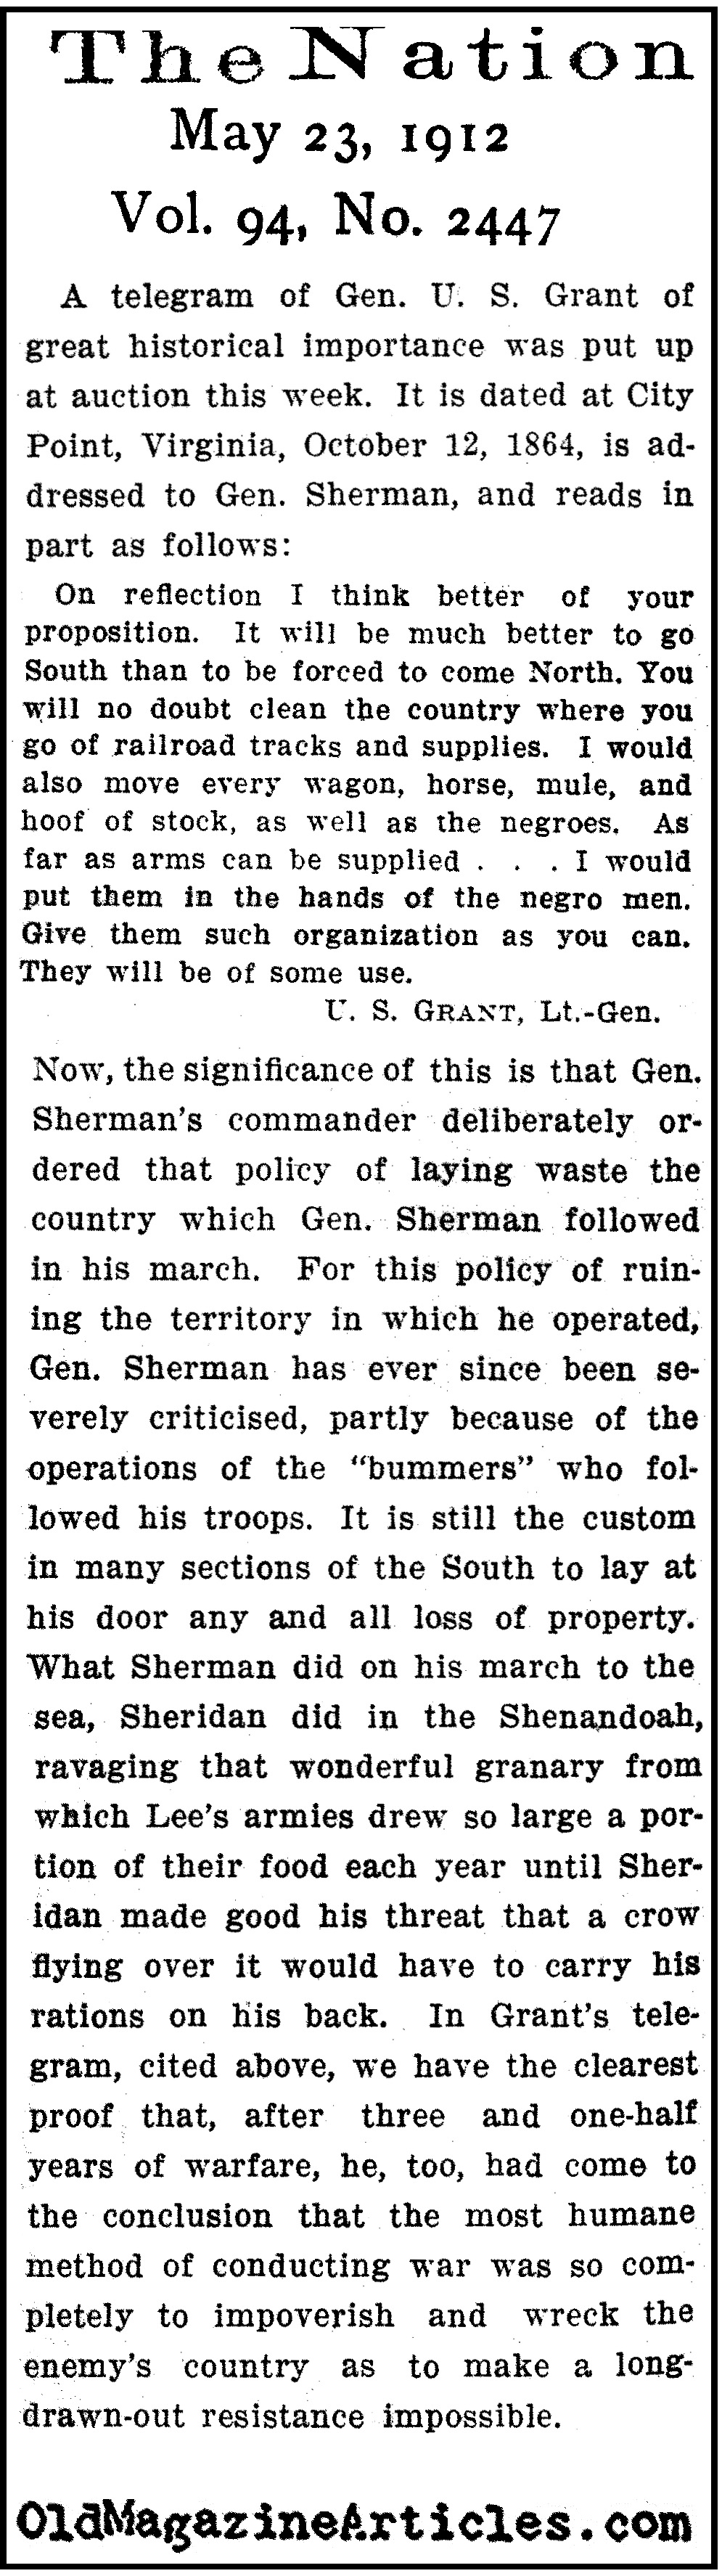 An Historic Telegram Addressed to General Sherman  (The Nation, 1912)